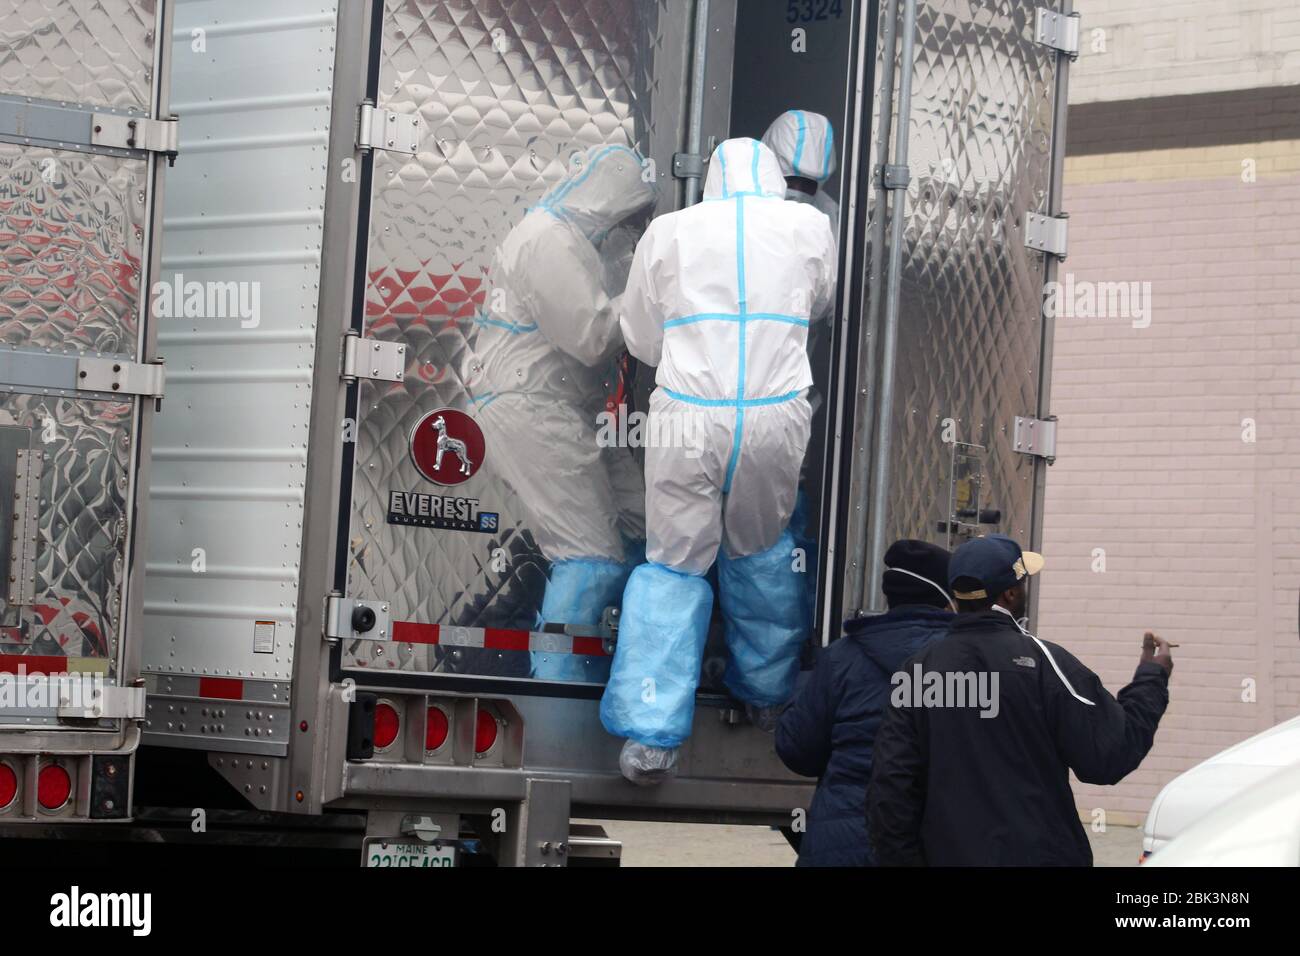 New York, New York, USA. 30th Apr, 2020. This man, dressed in a hazmat, climbs in one of the big refrigerated trucks where bodies have been disposed next to the Andrew T. Cleckley Funeral Home in Brooklyn whose corpses not properly cared have been removed. 60 bodies were stored in 4 non-refregerated vehiciles lining the street nearby stores. Neighbors reported a foul smell still persistent and fluids dripping from the trucks. The funeral home was overwhelmed by COVID-19 deaths, waiting for weeks for cremations in New York. Credit: Marie Le Ble/ZUMA Wire/Alamy Live News Stock Photo